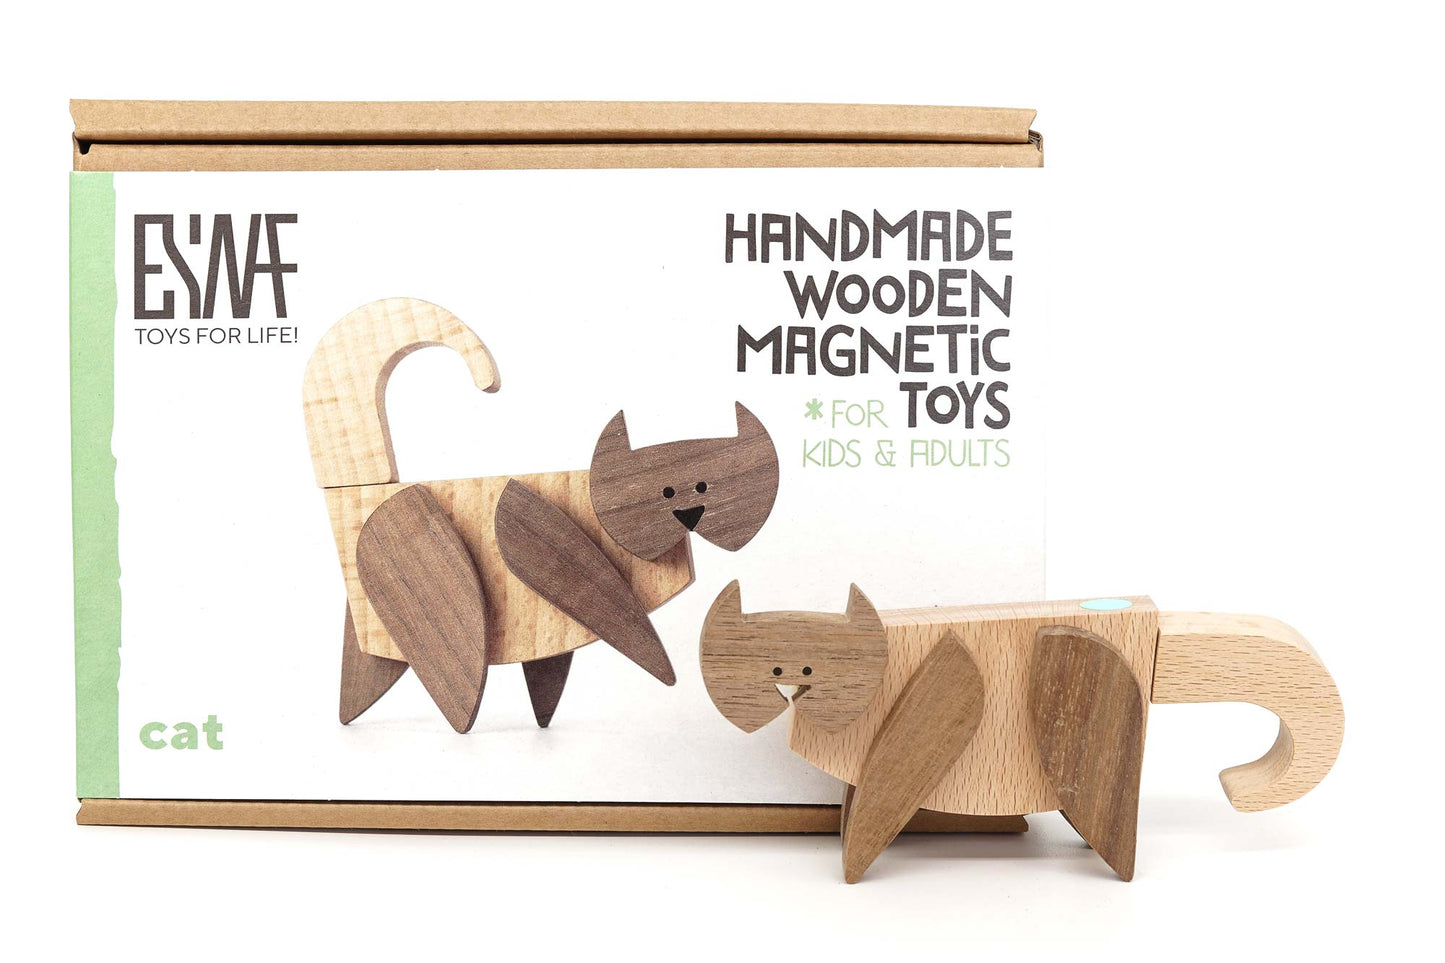 magnetic wooden toy cat with box and packaging